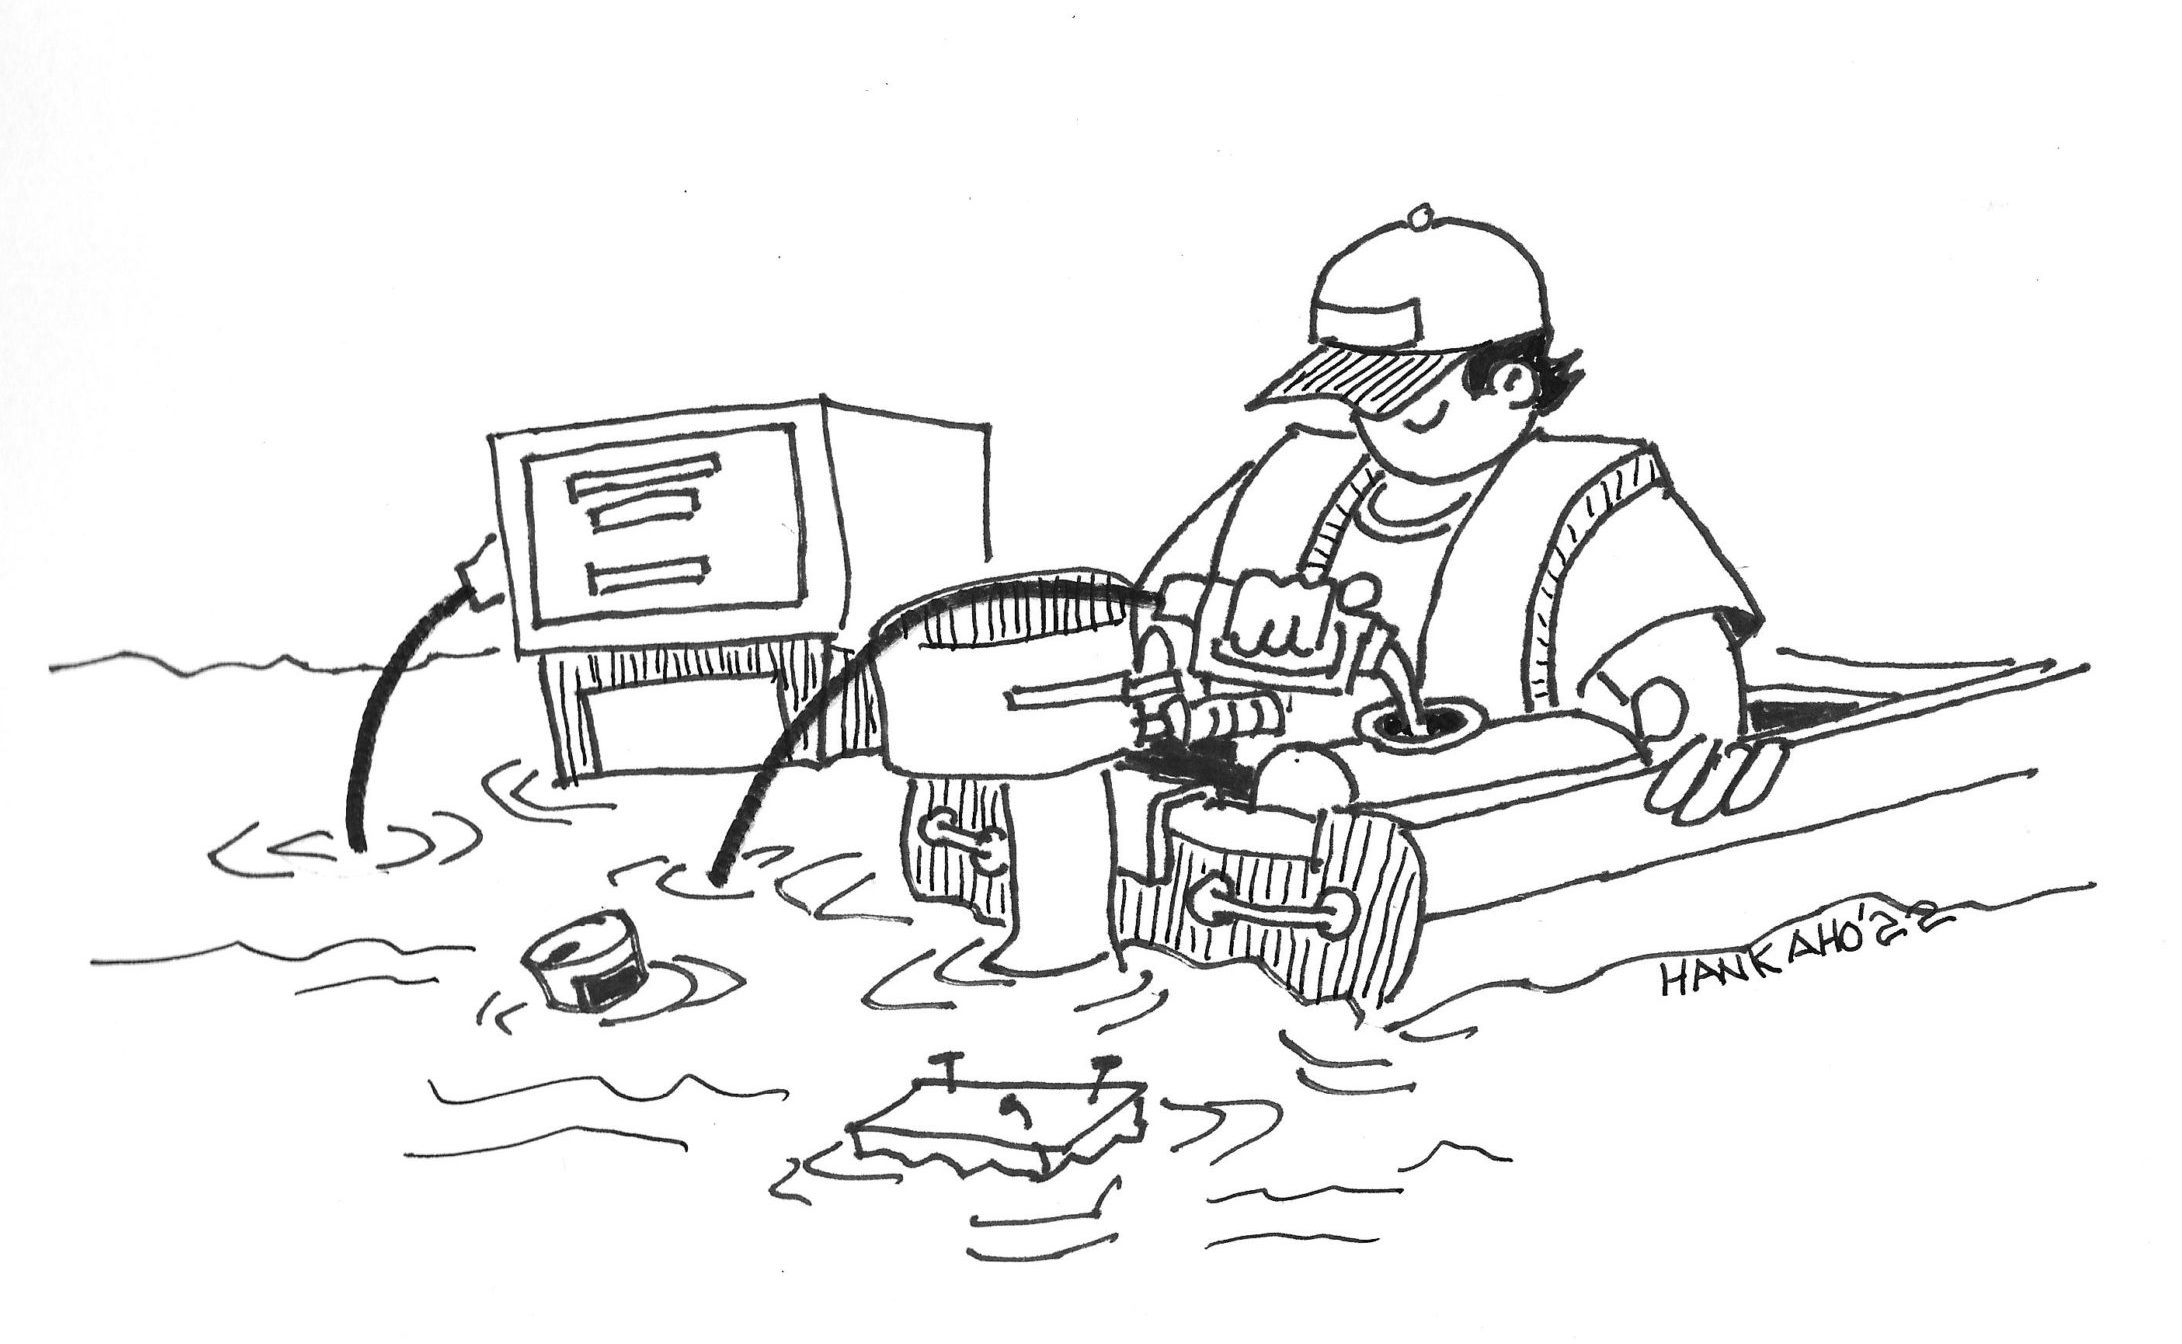 Cartoon of man at flooded gas station filling up his boat.